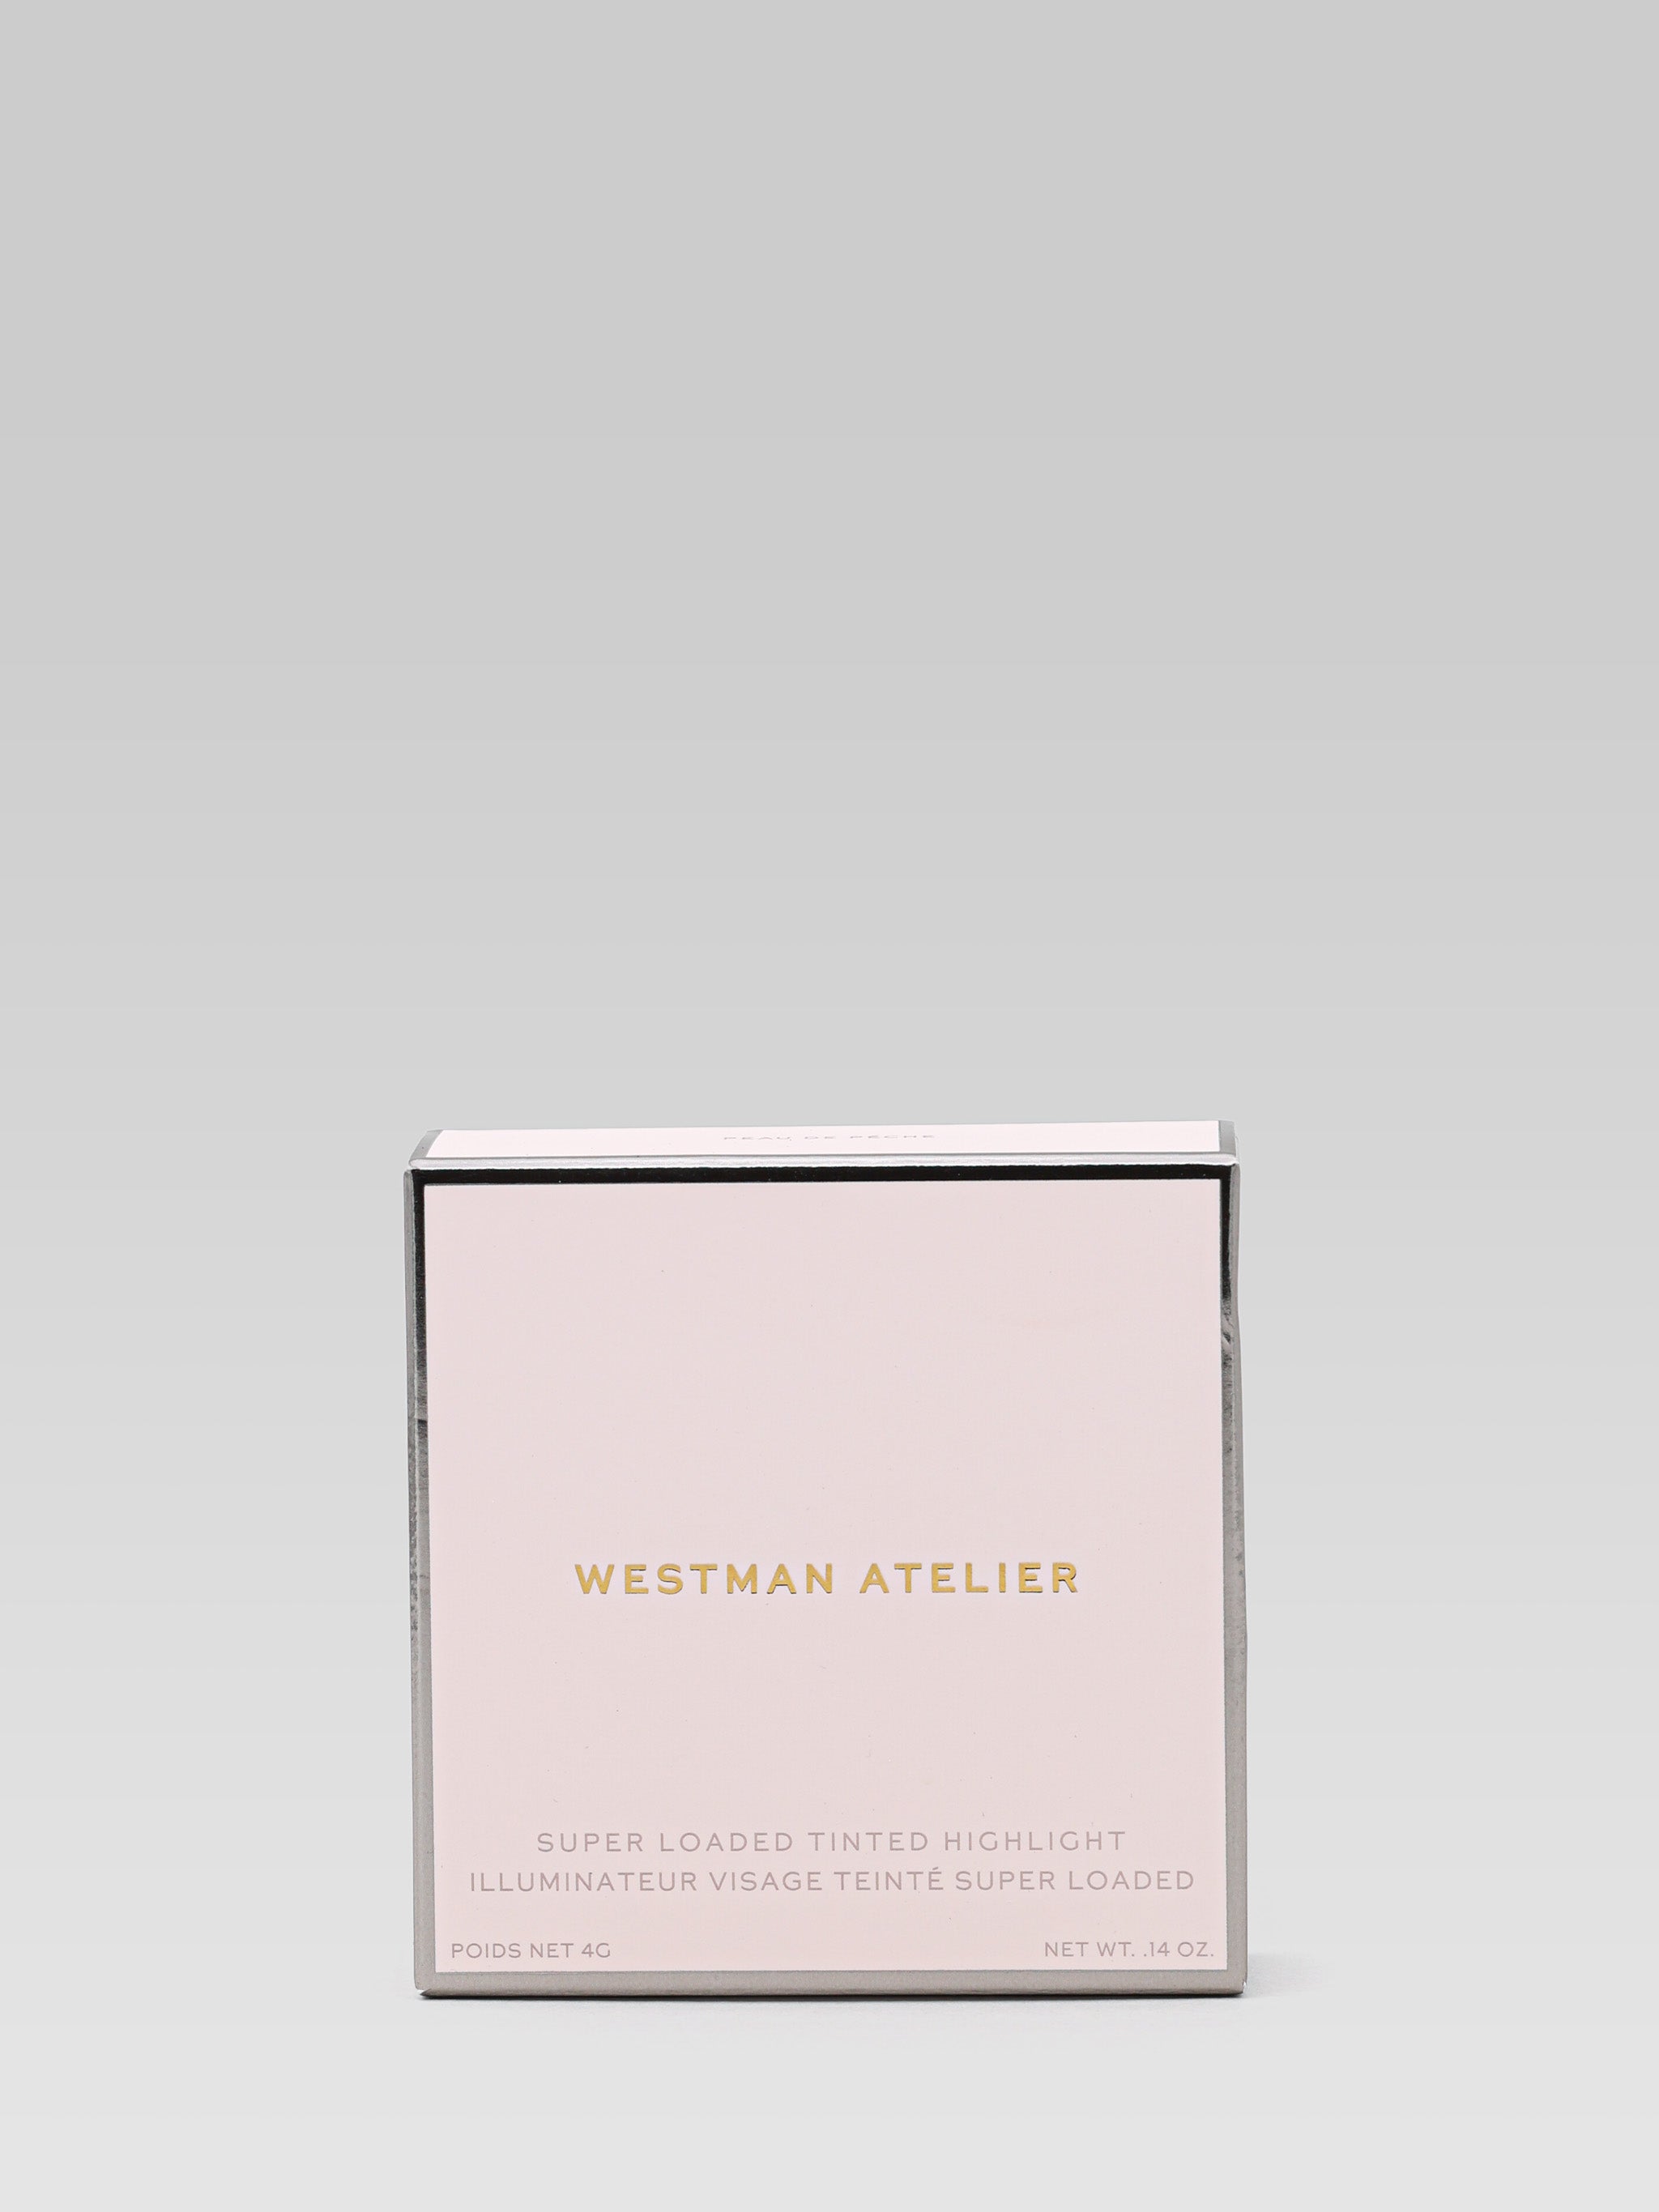 Westman Atelier Super Loaded Tinted Highlight ligh pink packaging